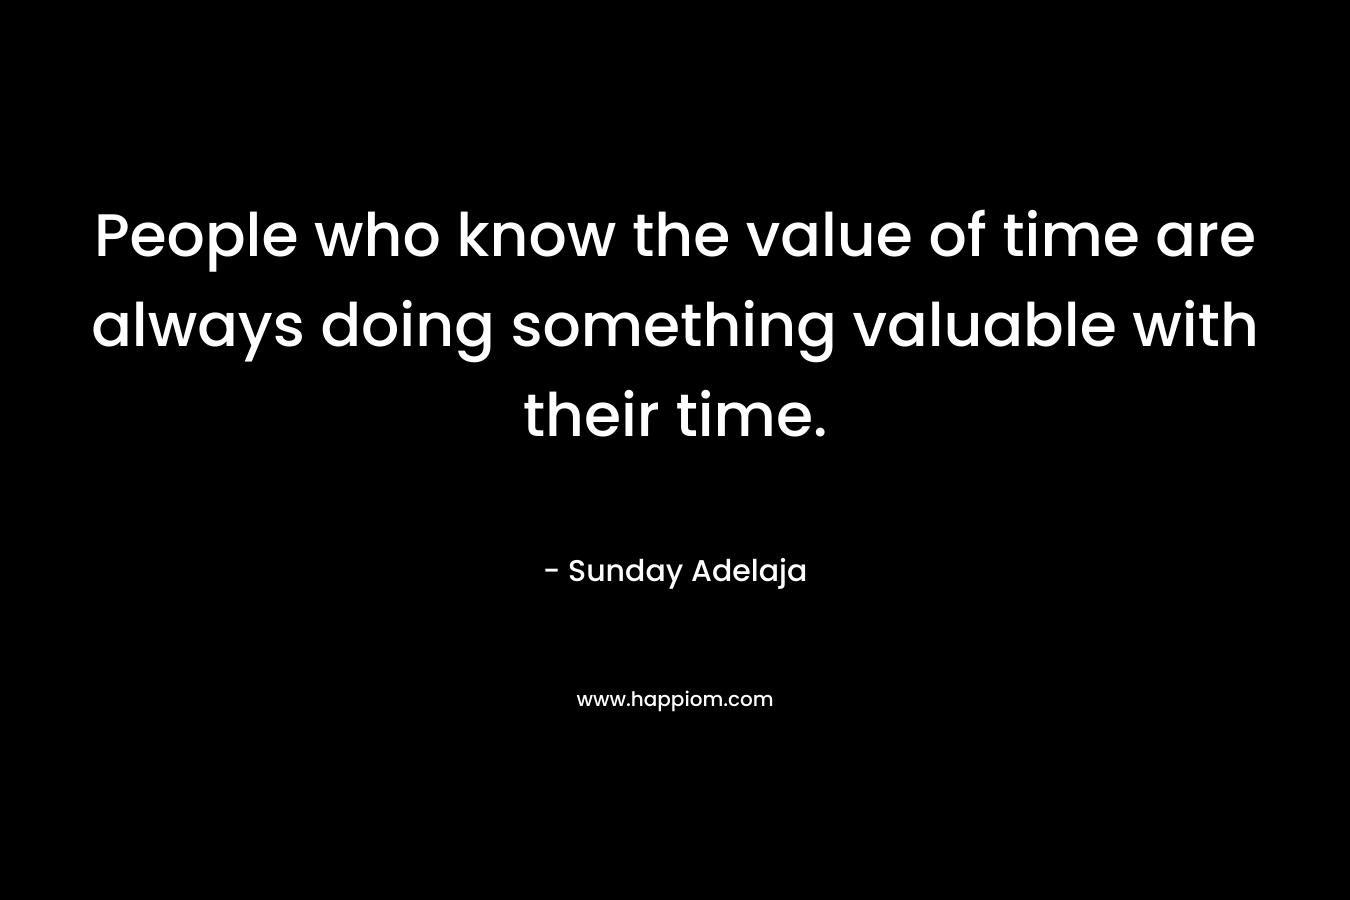 People who know the value of time are always doing something valuable with their time.